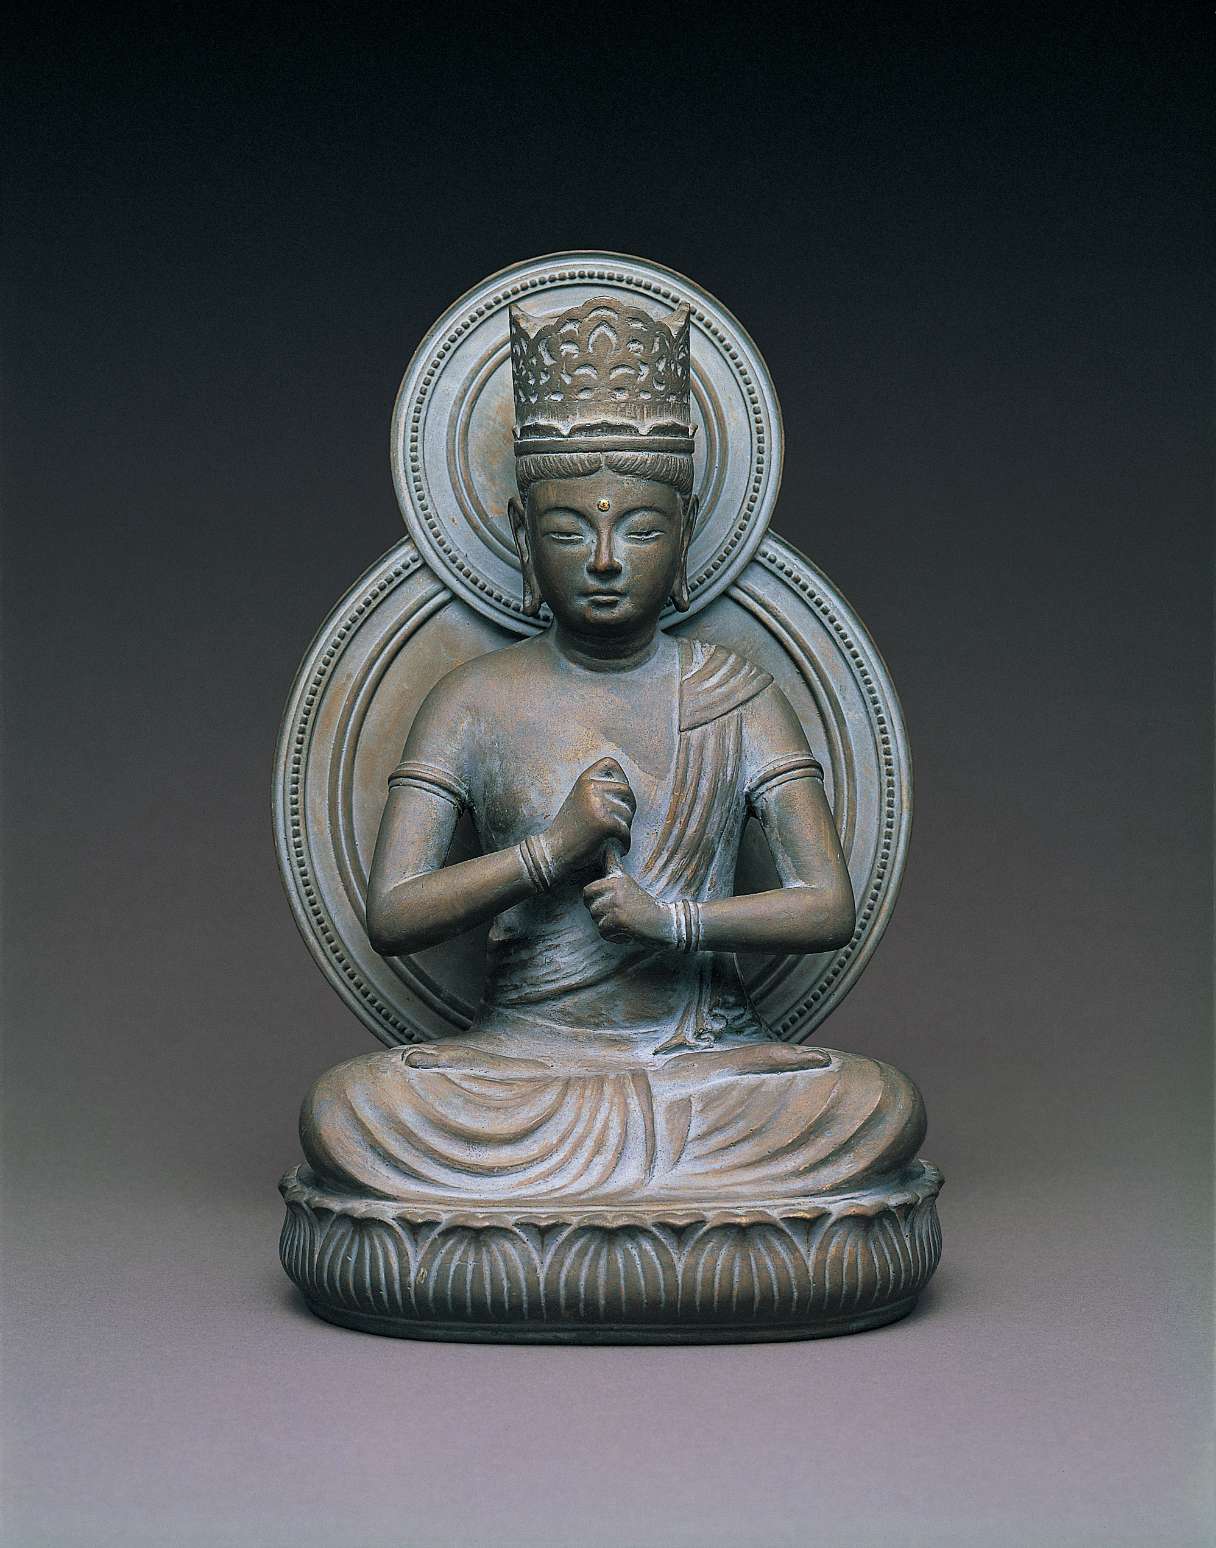 A matte, blue and gray hued  statue of a buddha wearing a tall crown, sitting cross-legged atop a seat of curving lotus petals, right hand grasping upturned left index finger in front of the body.